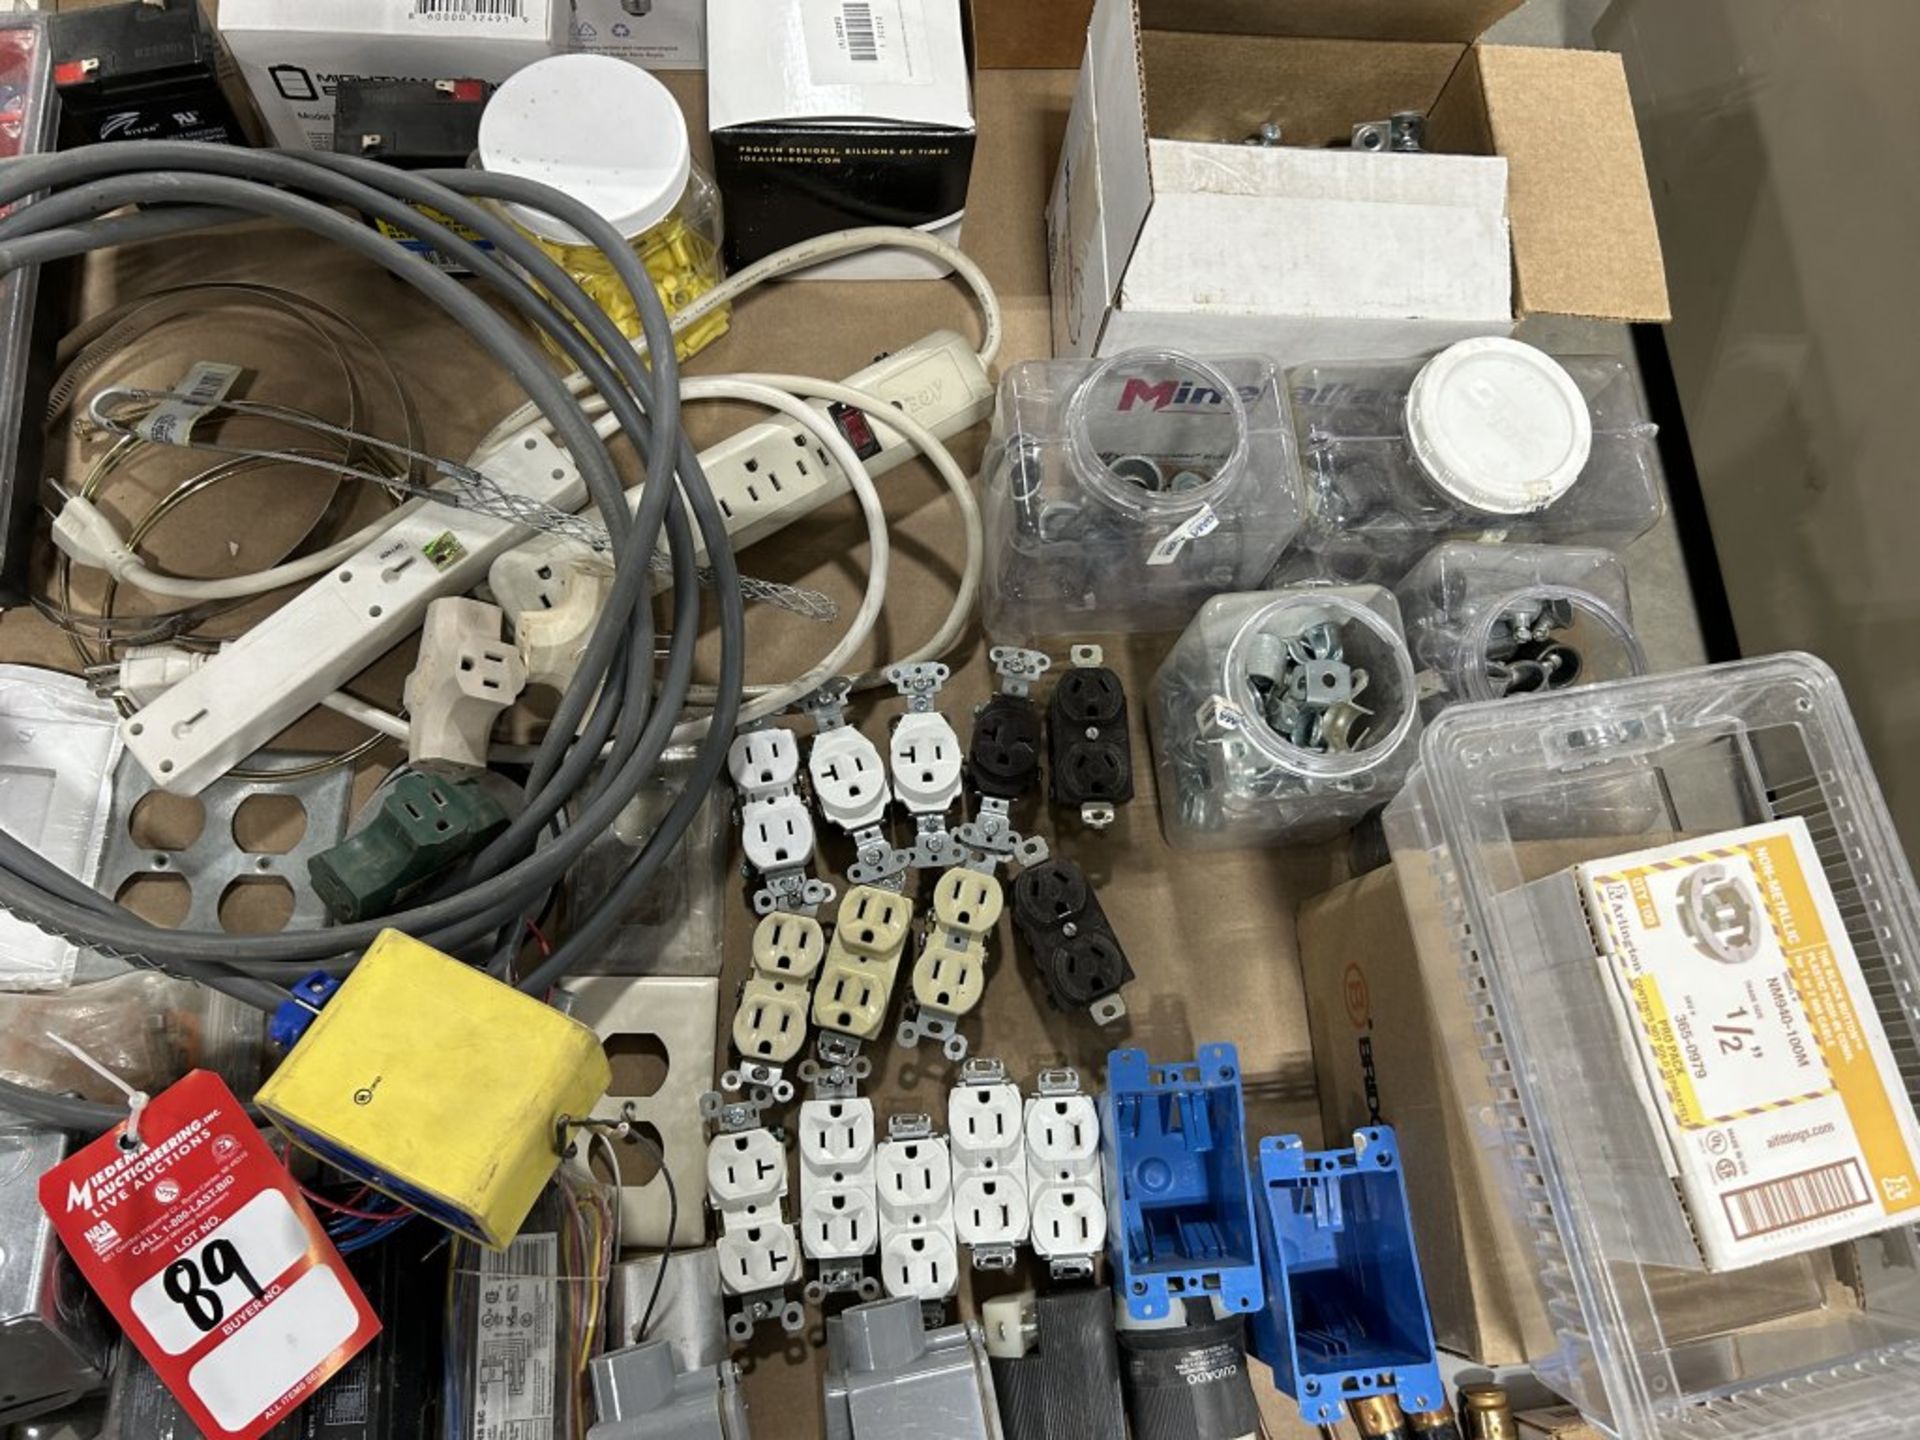 LARGE PALLET FULL OF ASSORTED FUSES, SWITCHES, OUTLETS, LIGHT BULBS, SPRINGS, ETC. - Image 7 of 7